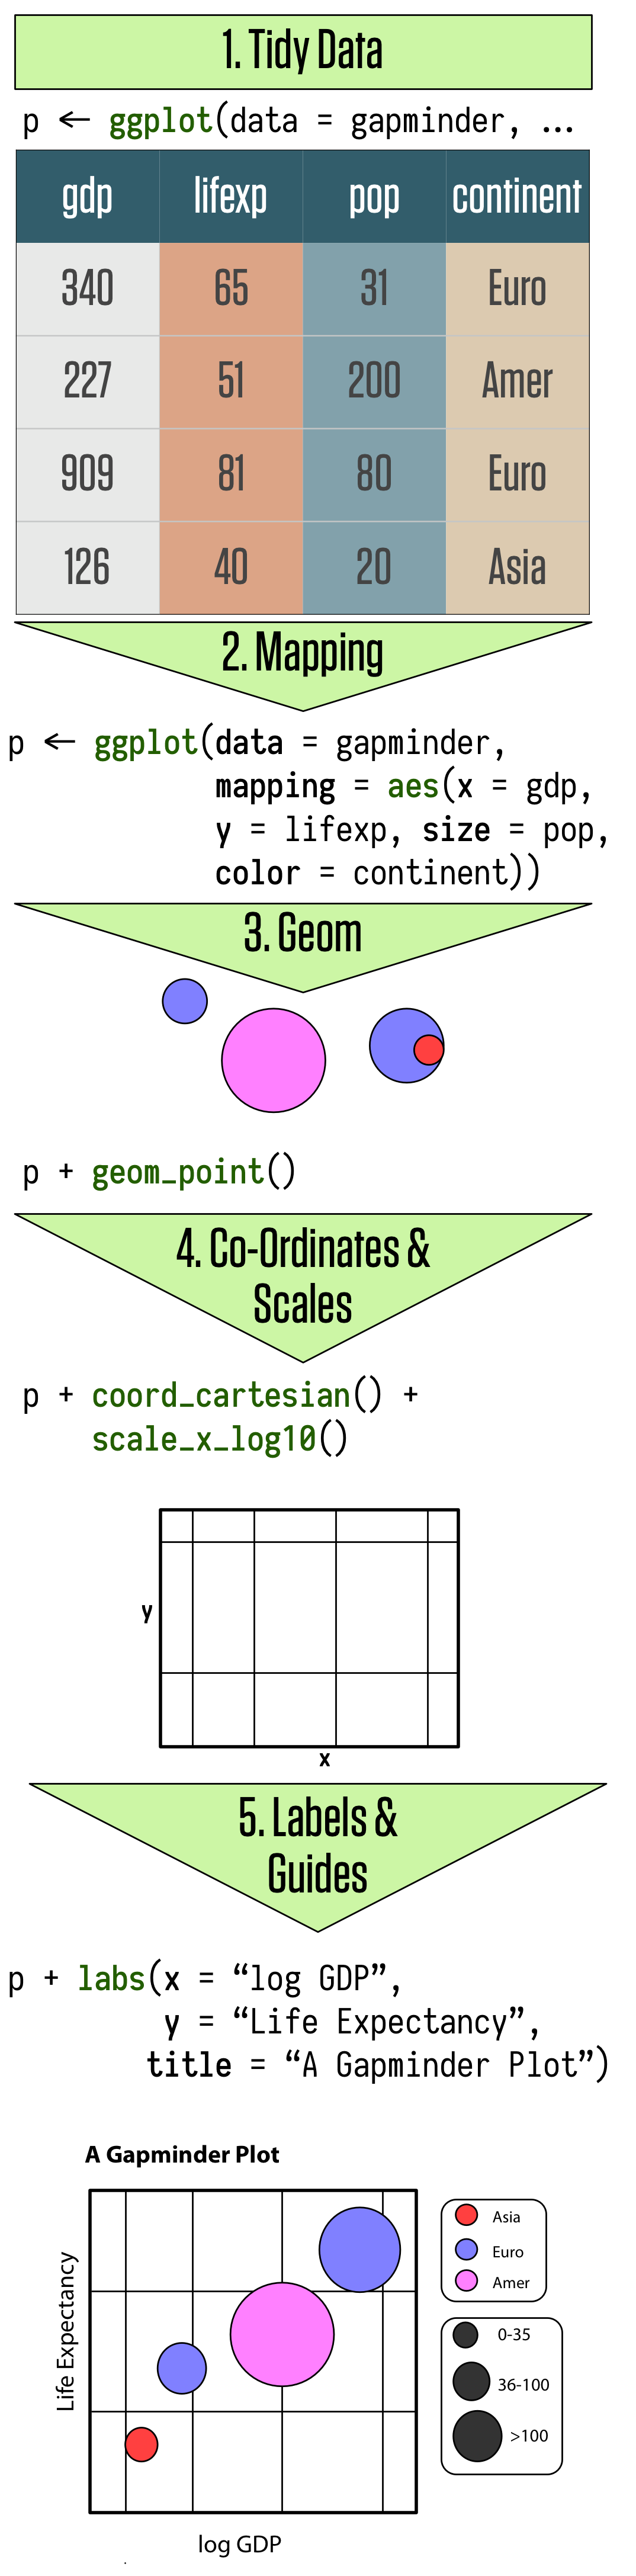 The main elements of ggplot's grammar of graphics. This chapter goes through these steps in detail.